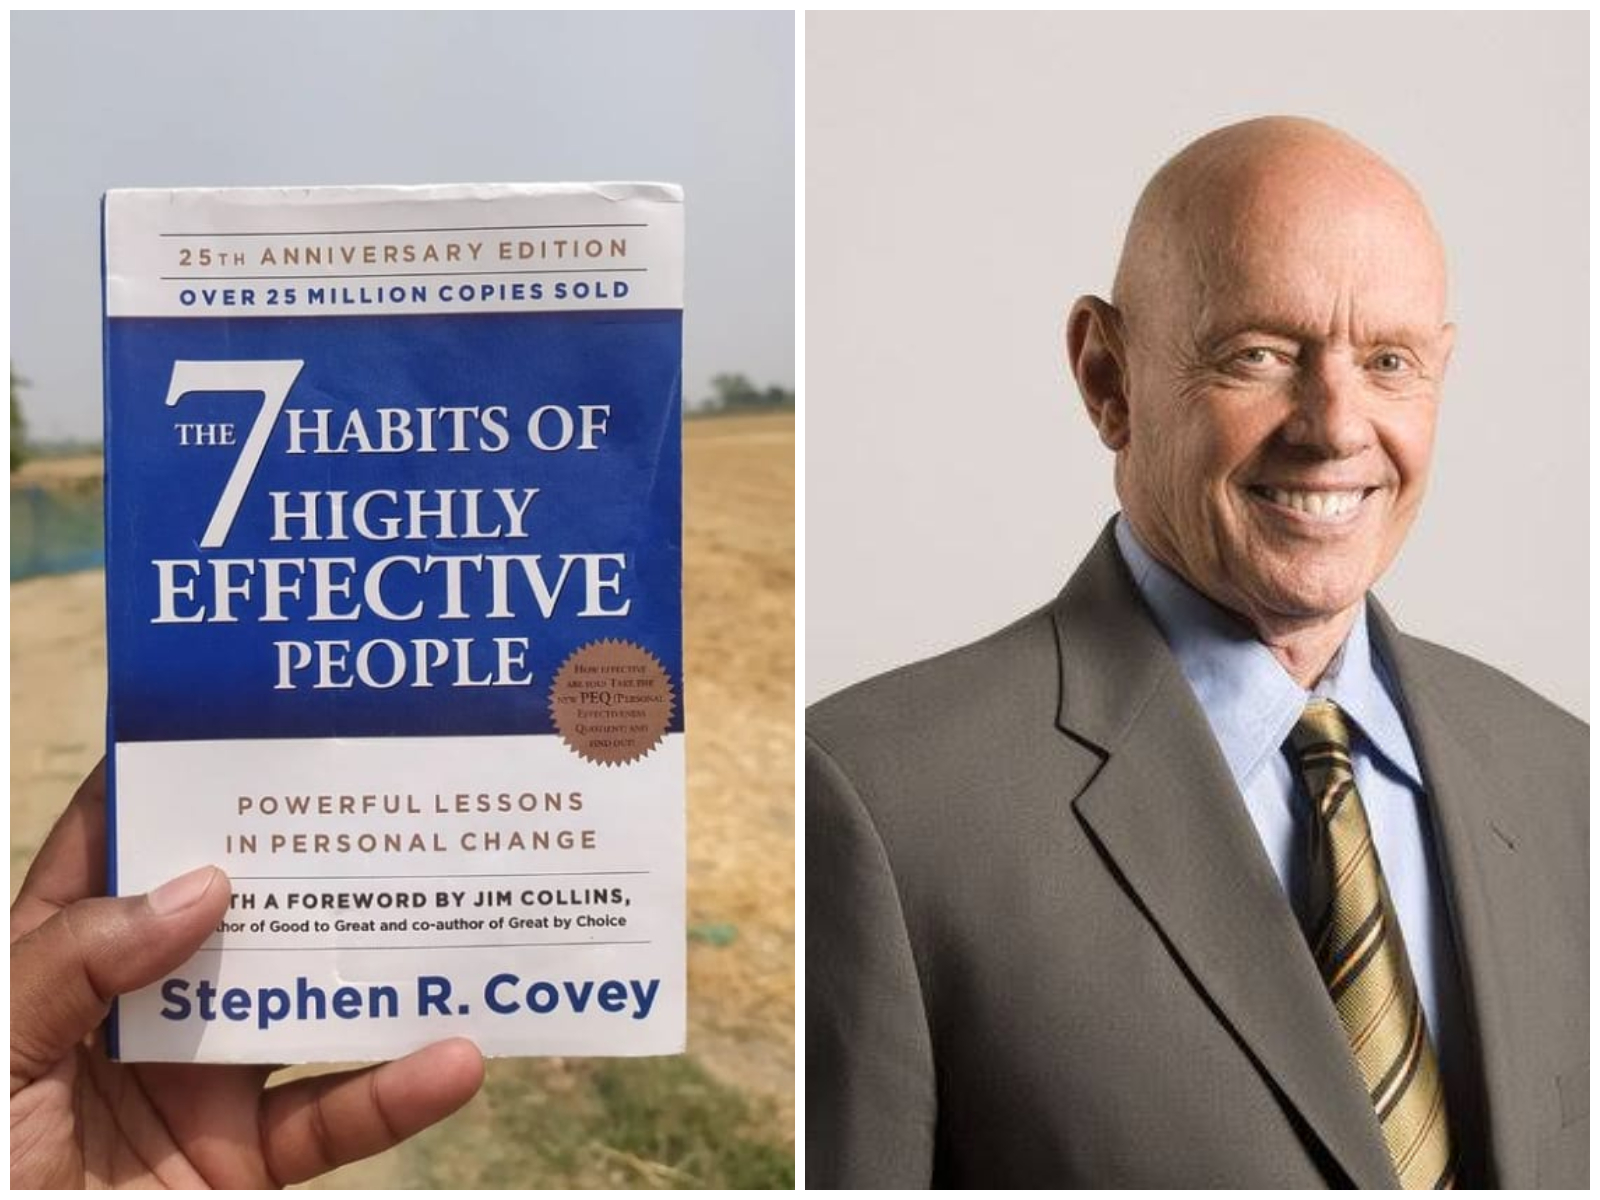 7 Habits of Highly Effective People summary: What are the key takeaways?